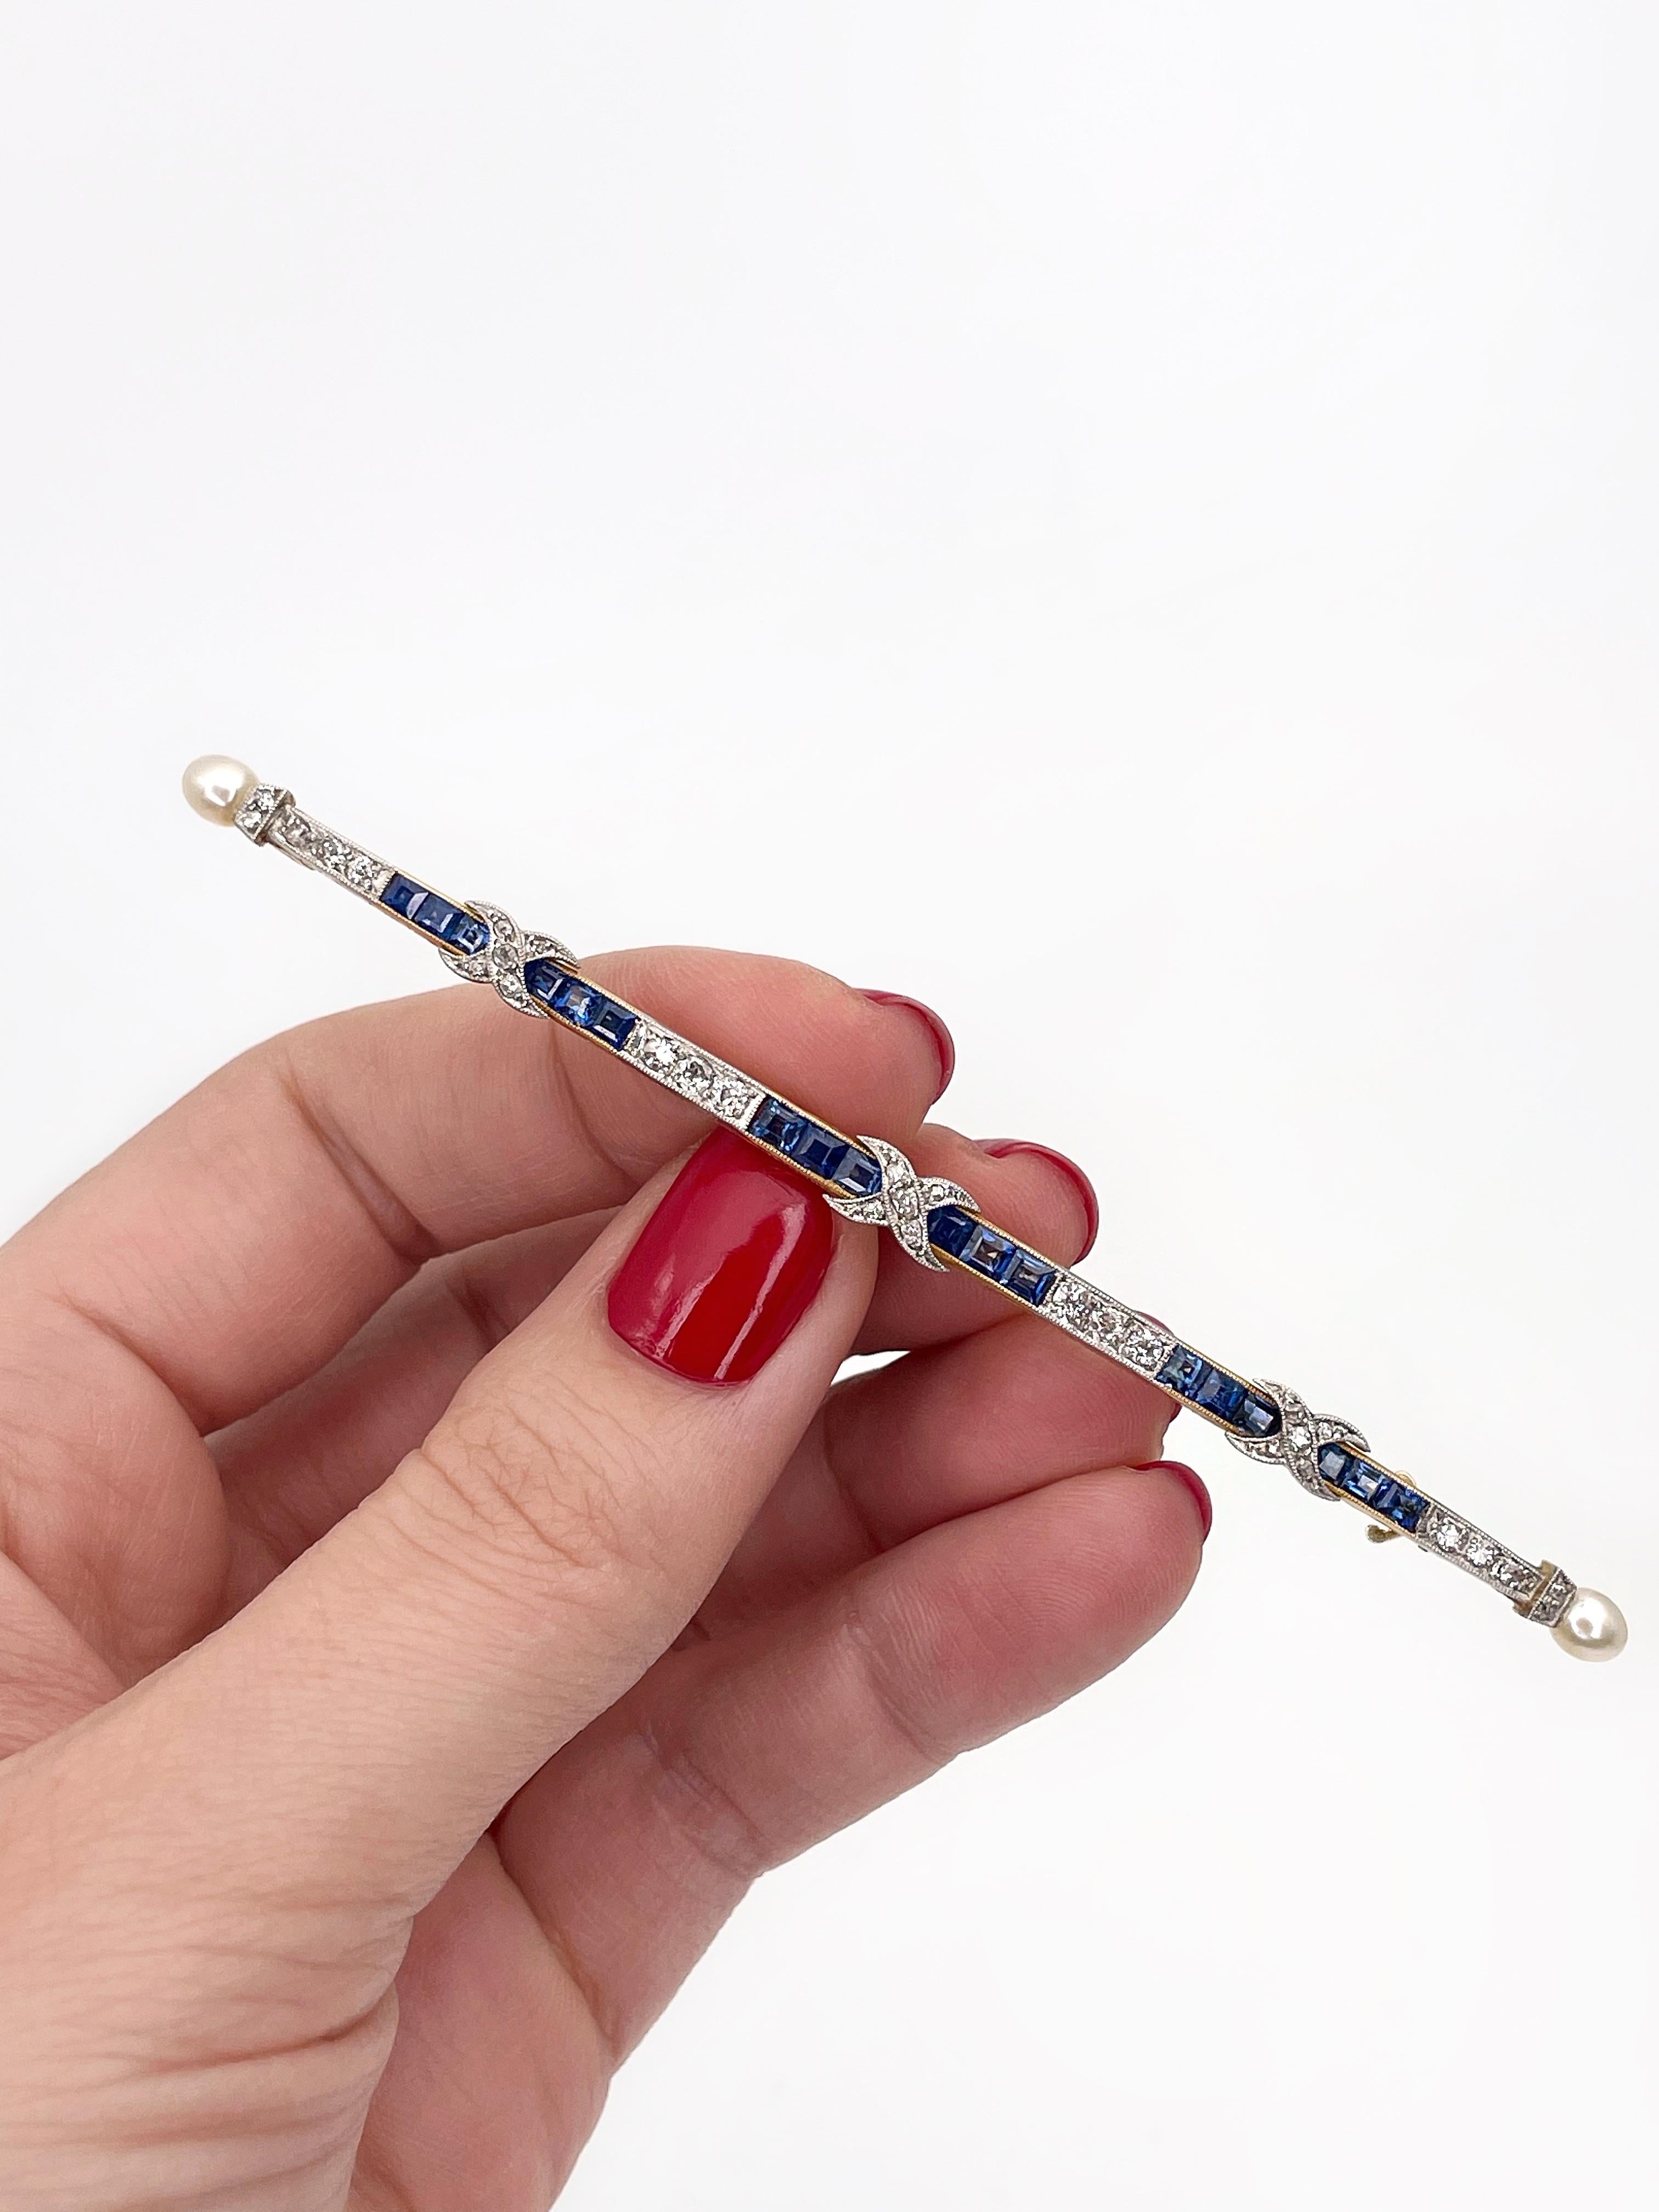 This is an Art Deco long bar brooch crafted in 18K gold and adorned with 900 hallmark platinum. The piece features 18 square cut blue sapphires (1.70ct, vB 7/2 7/4, VS-SI). 

The gems are paired with diamonds: 
-16pcs., old cut, 0.43ct, W-STW,